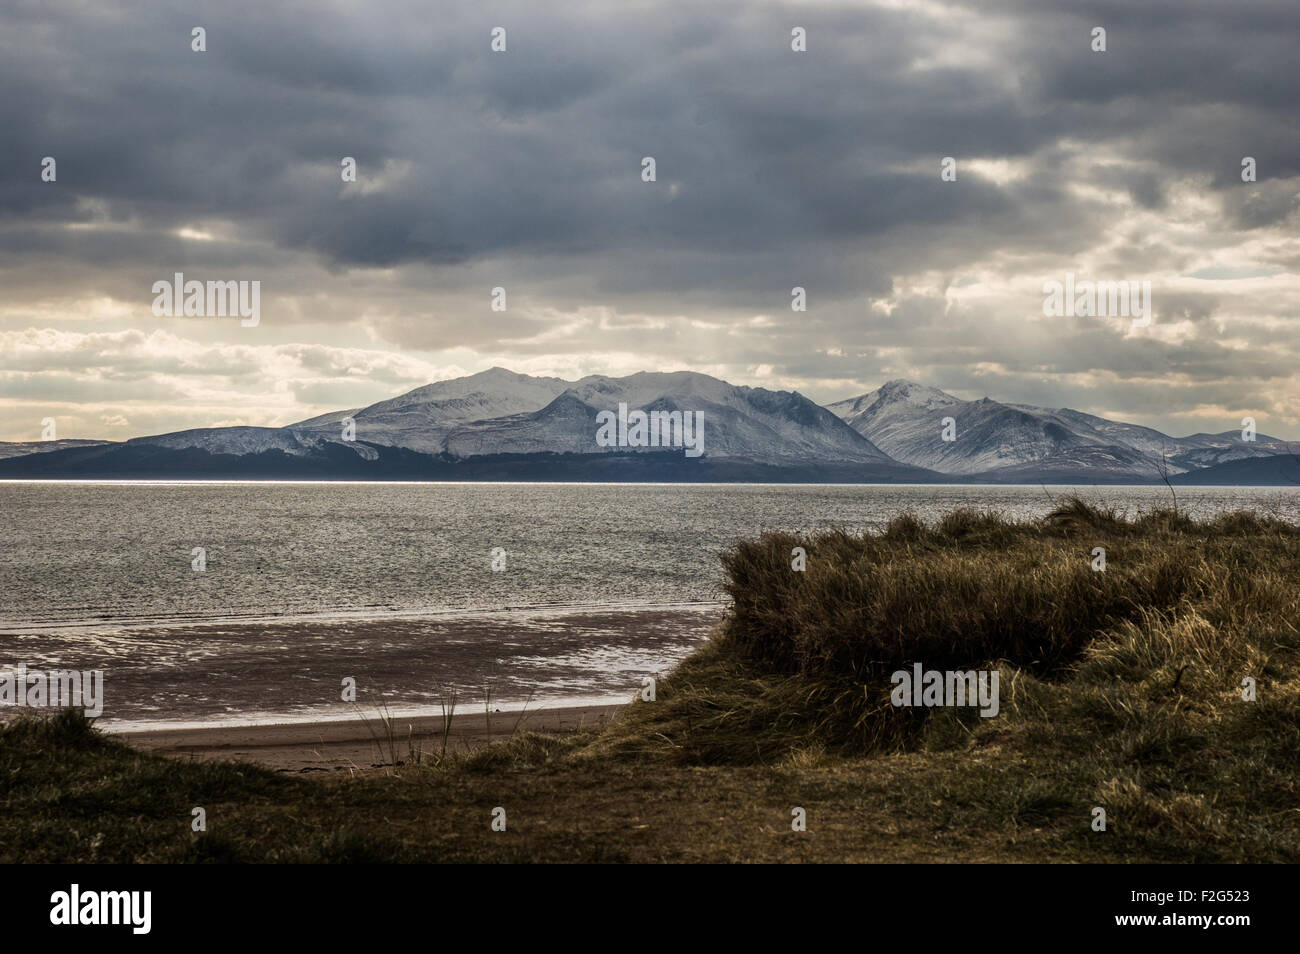 Snow covered mountain, Goatfell, on Arran with grass and beach in foreground. Stock Photo